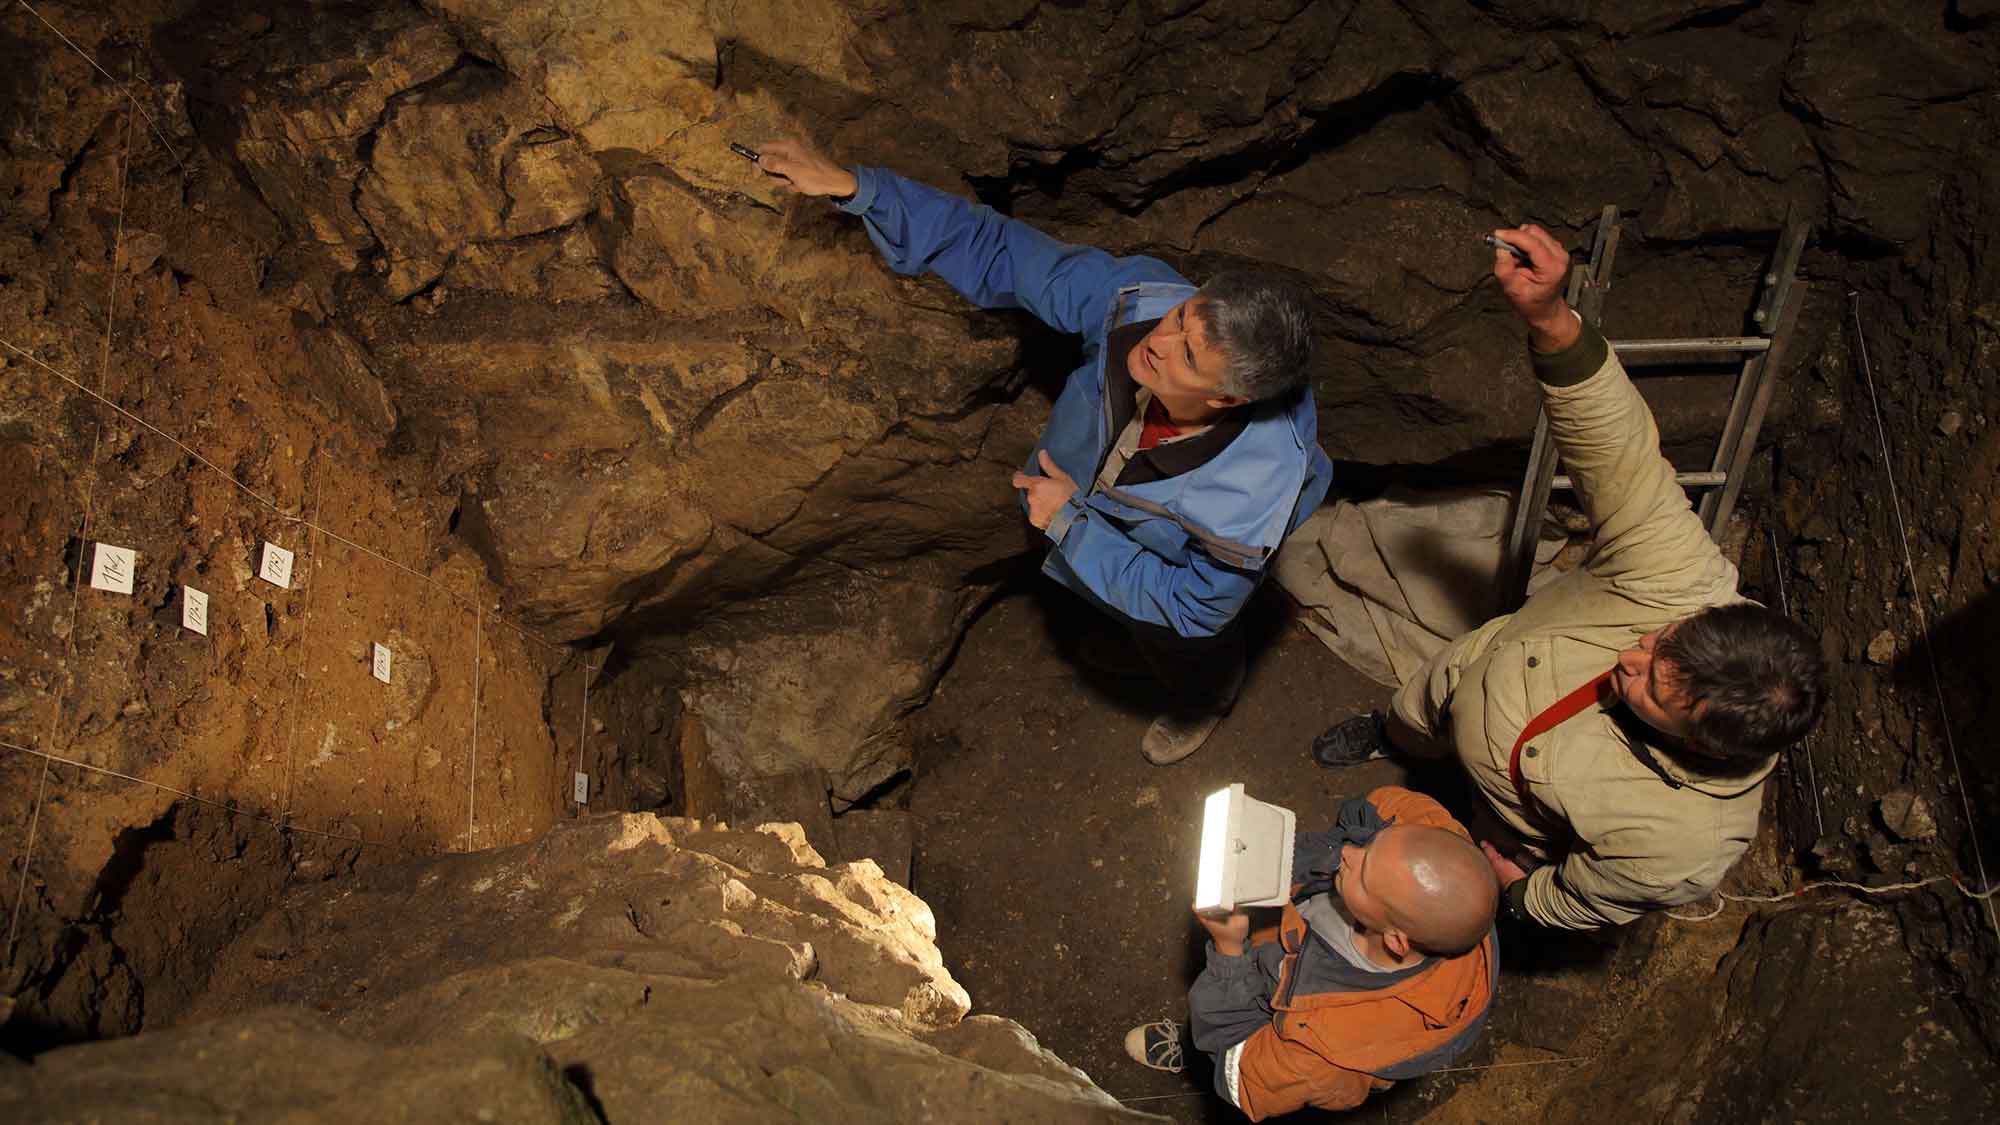 The Lost Legacy of the Super Intelligent Denisovans Who Calculated  Cygnocentric-based Cosmological Alignments 45,000 Years Ago